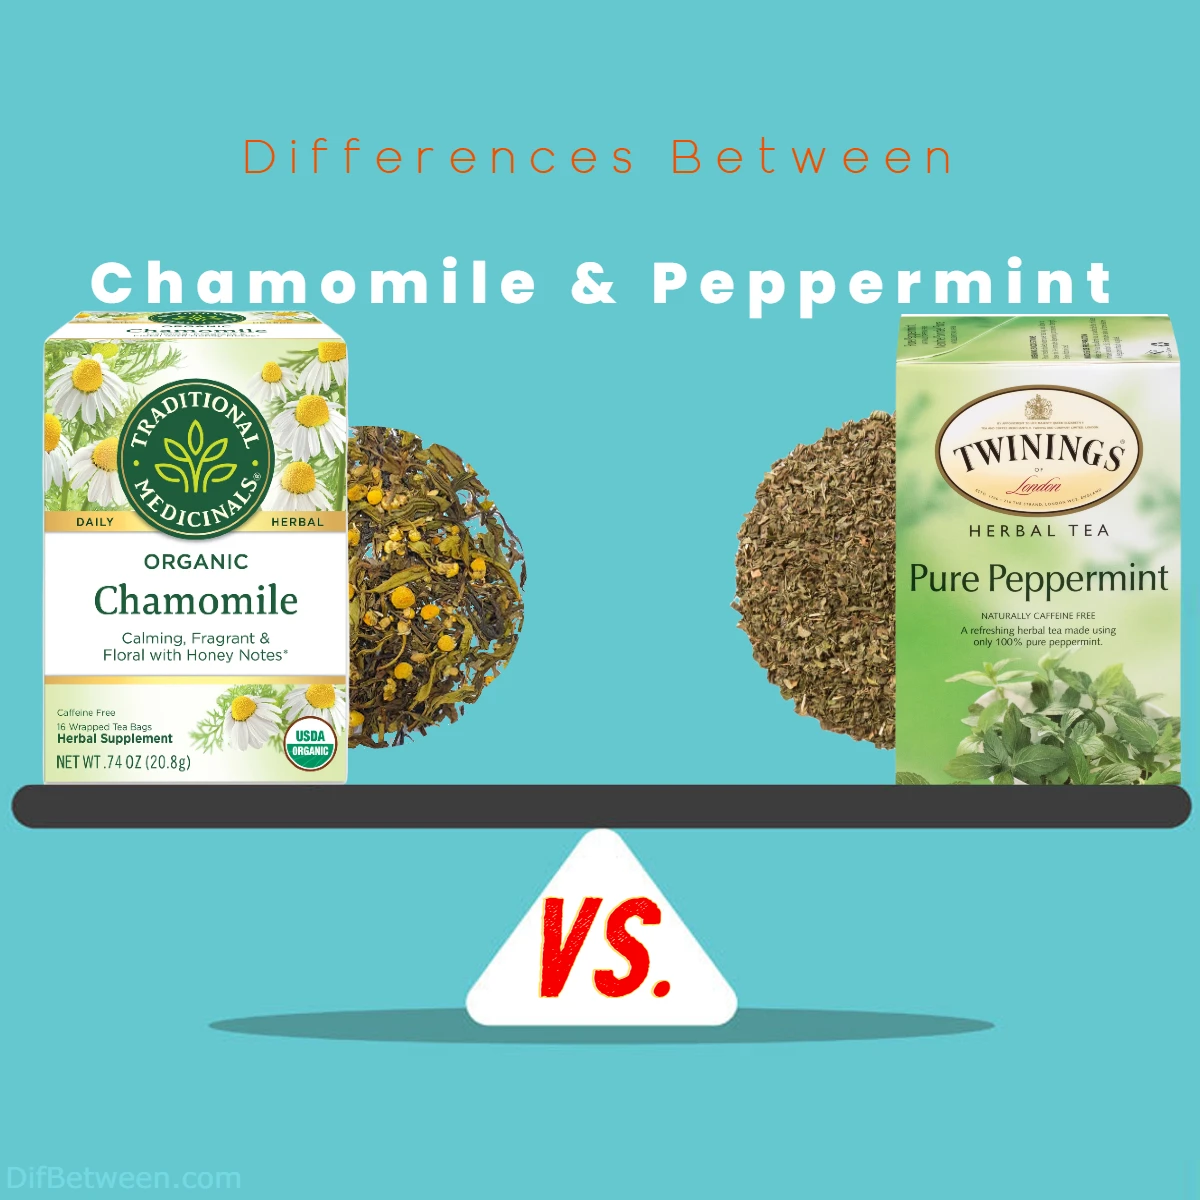 Differences Between Peppermint and Chamomile tea